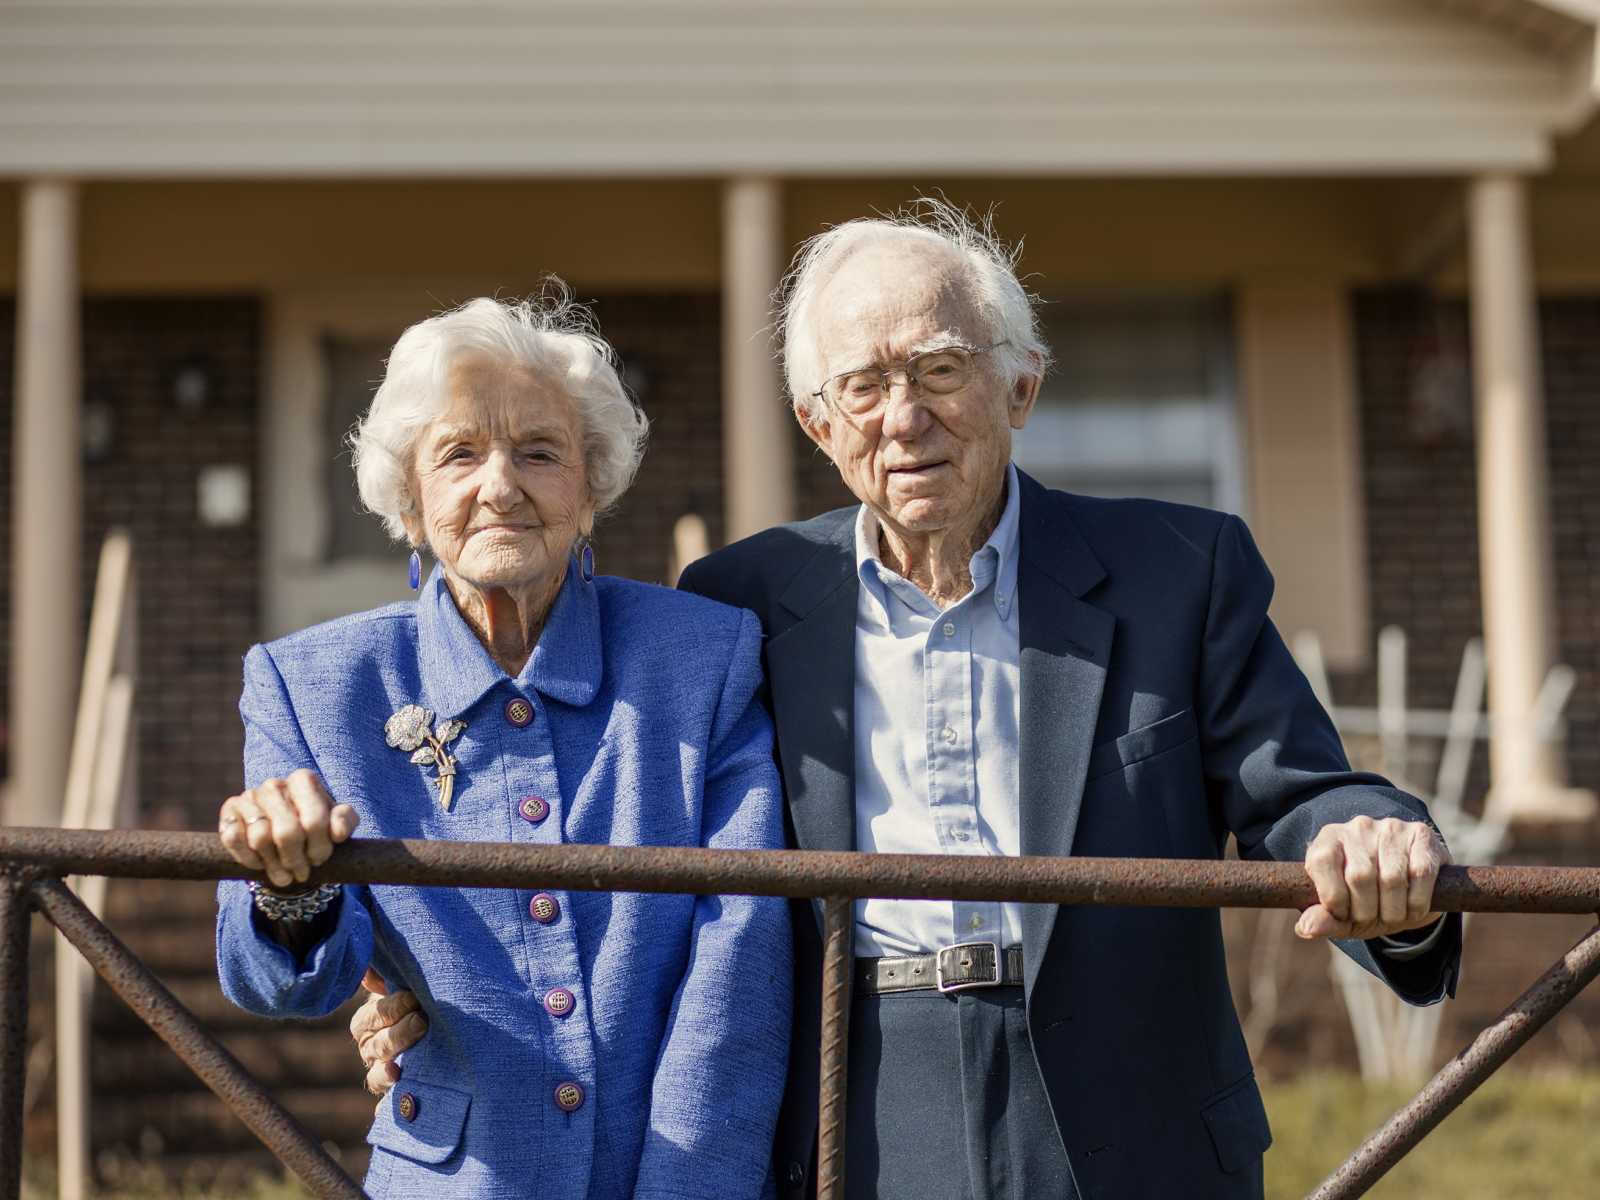 92 year old woman stands next to husband in formal attire in front of their home